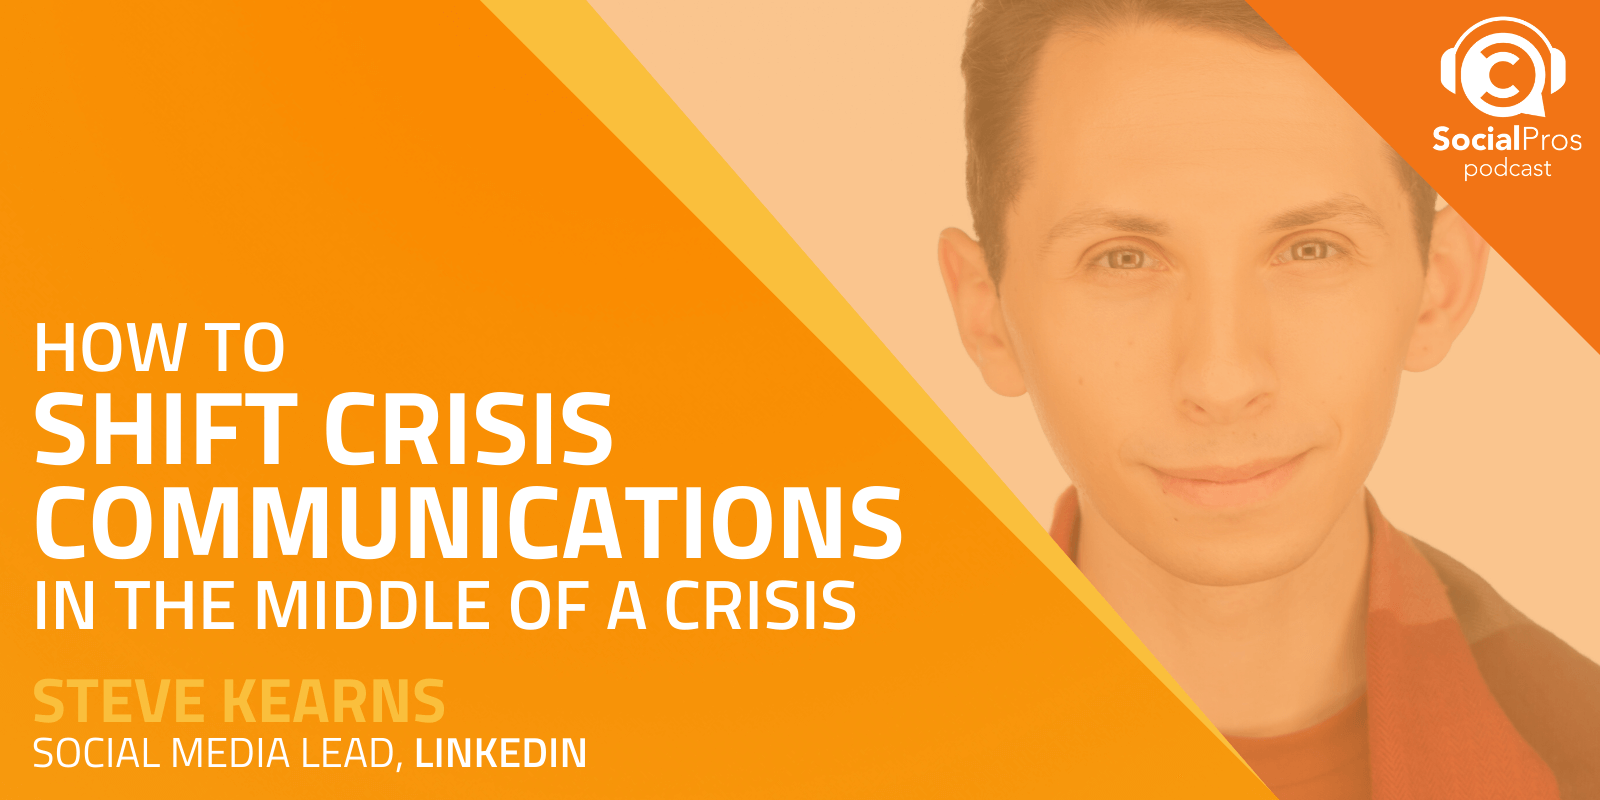 How to Shift Crisis Communications in the Middle of a Crisis